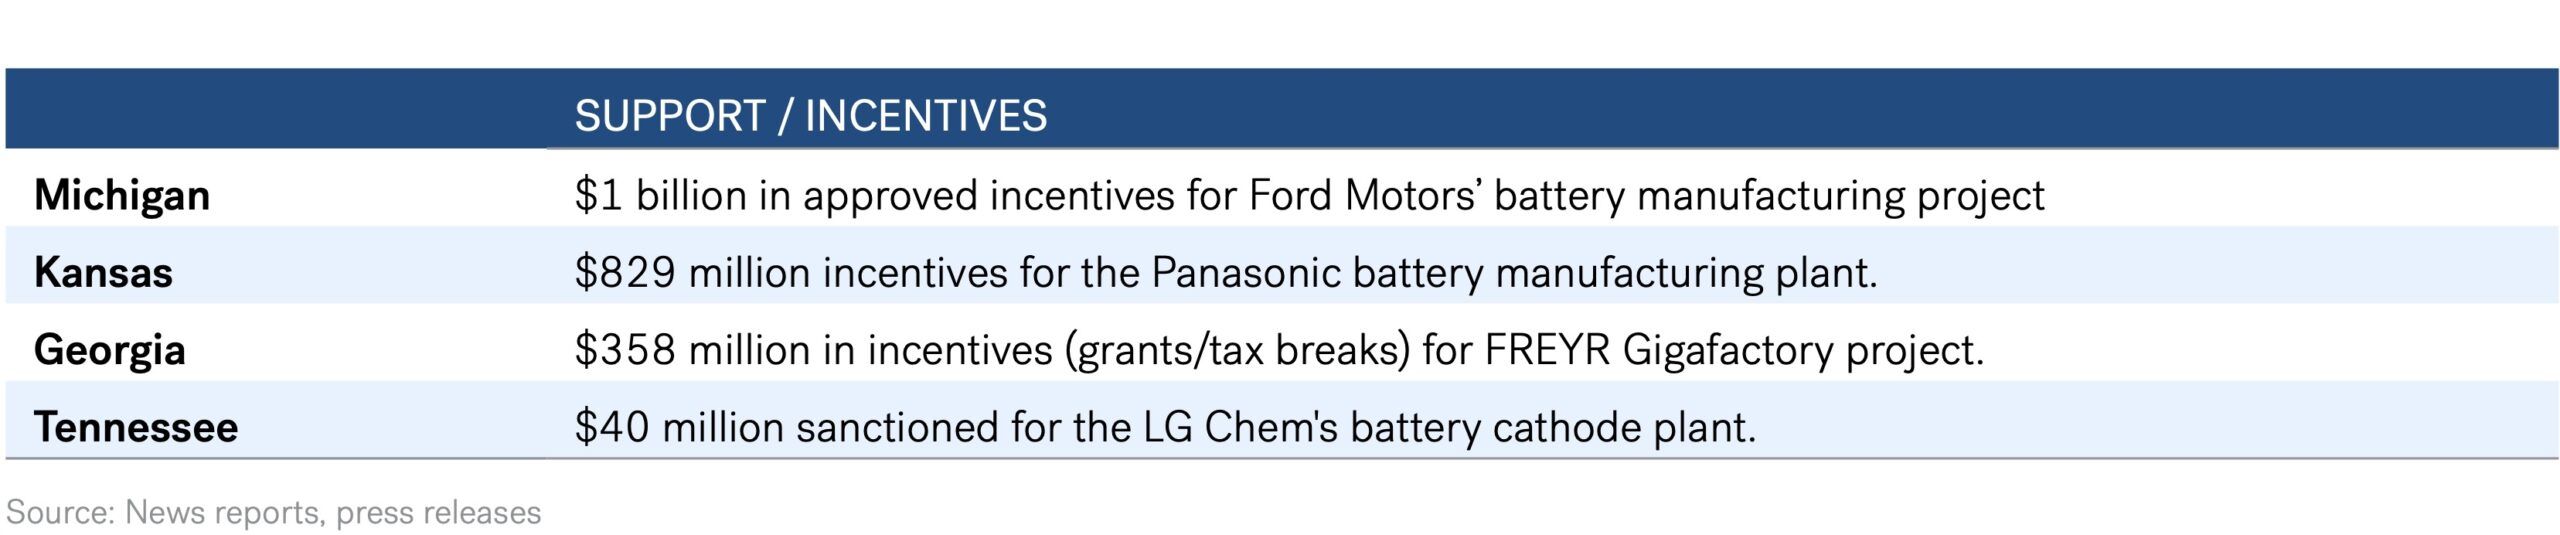 Gigafactory - US States Policy Support for Battery Manufacturing Investments (illustrative)